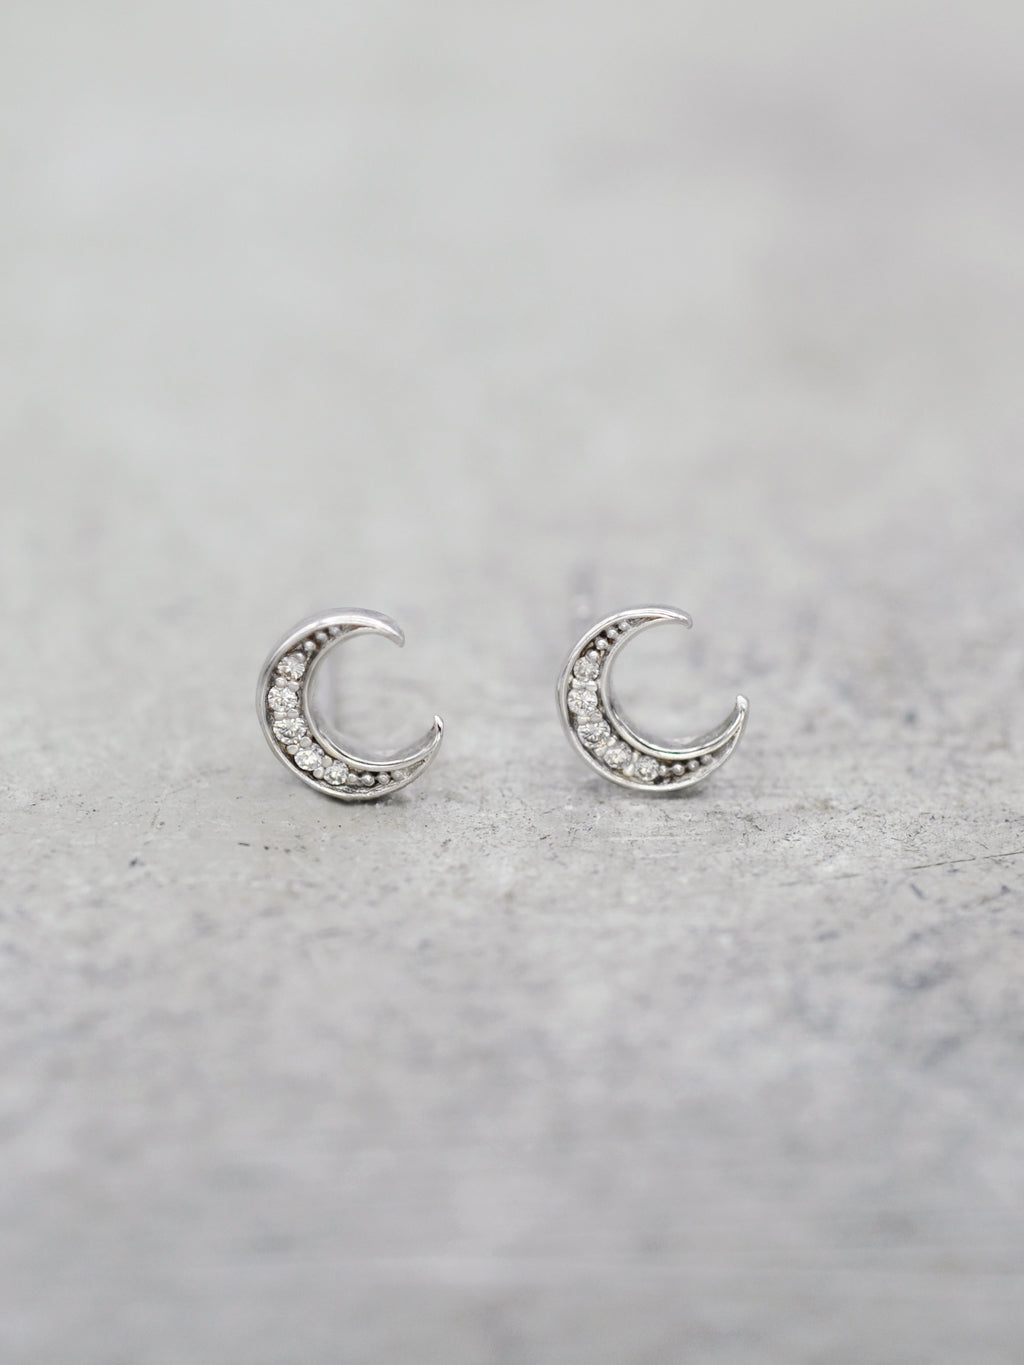 Hammered Crescent Moon Earrings, Silver – Midnight Pacific Studio